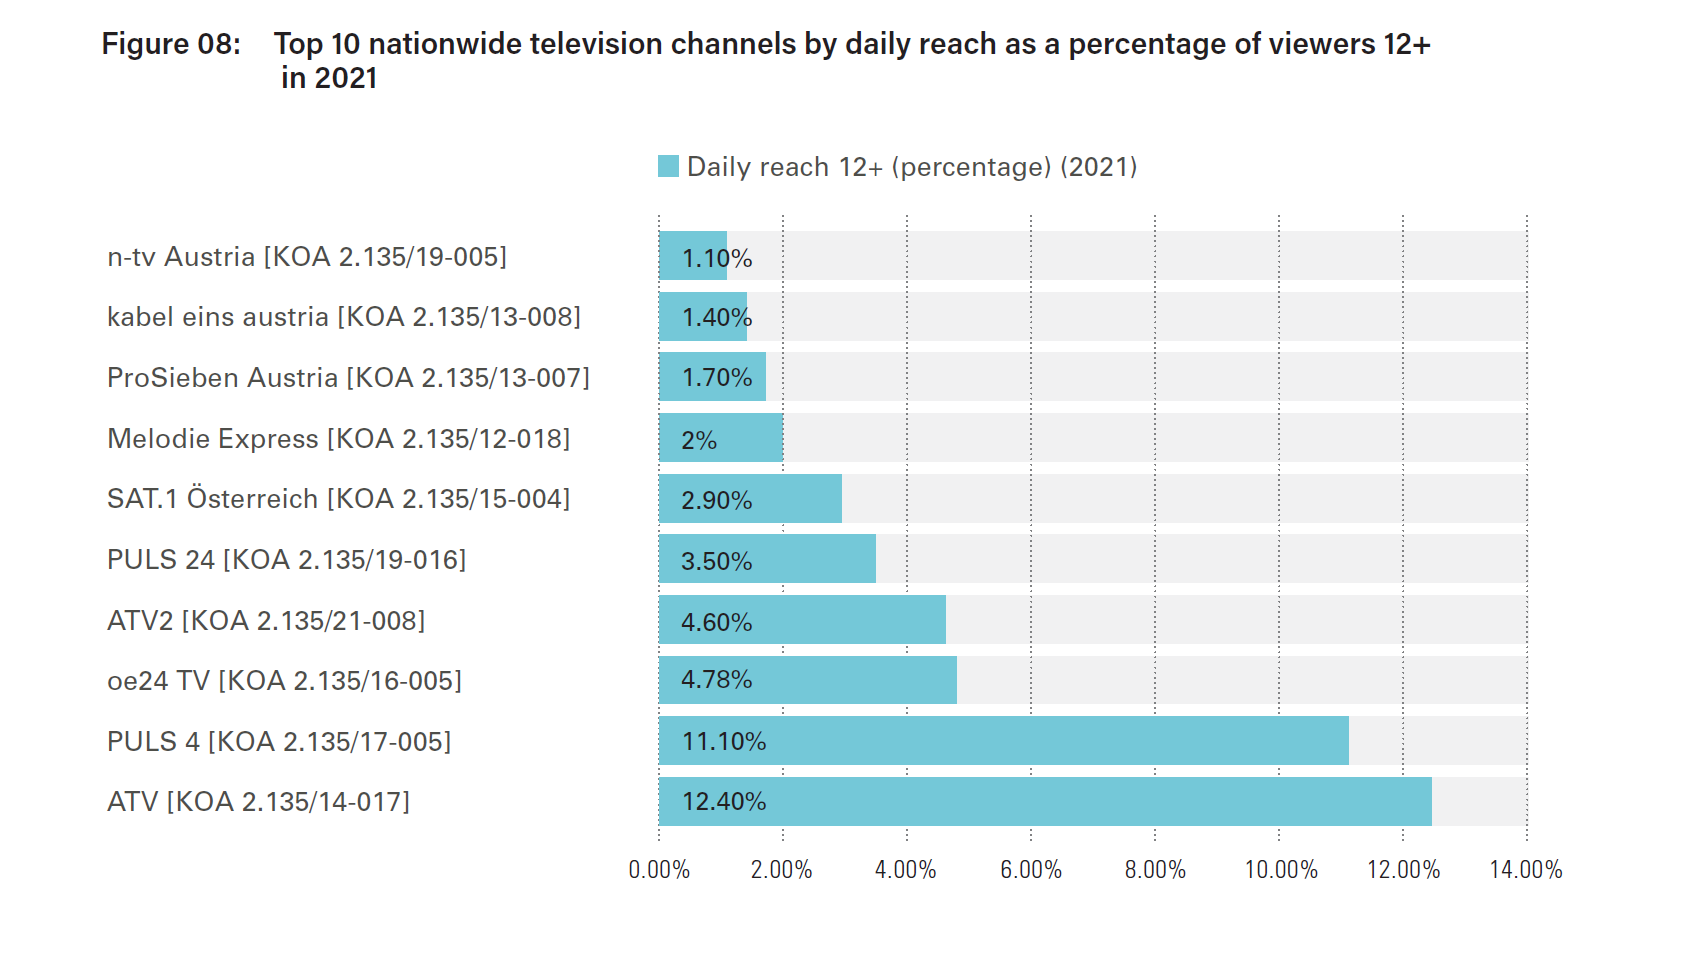 Top 10 nationwide television channels by daily reach as a percentage of viewers 12+ in 2021